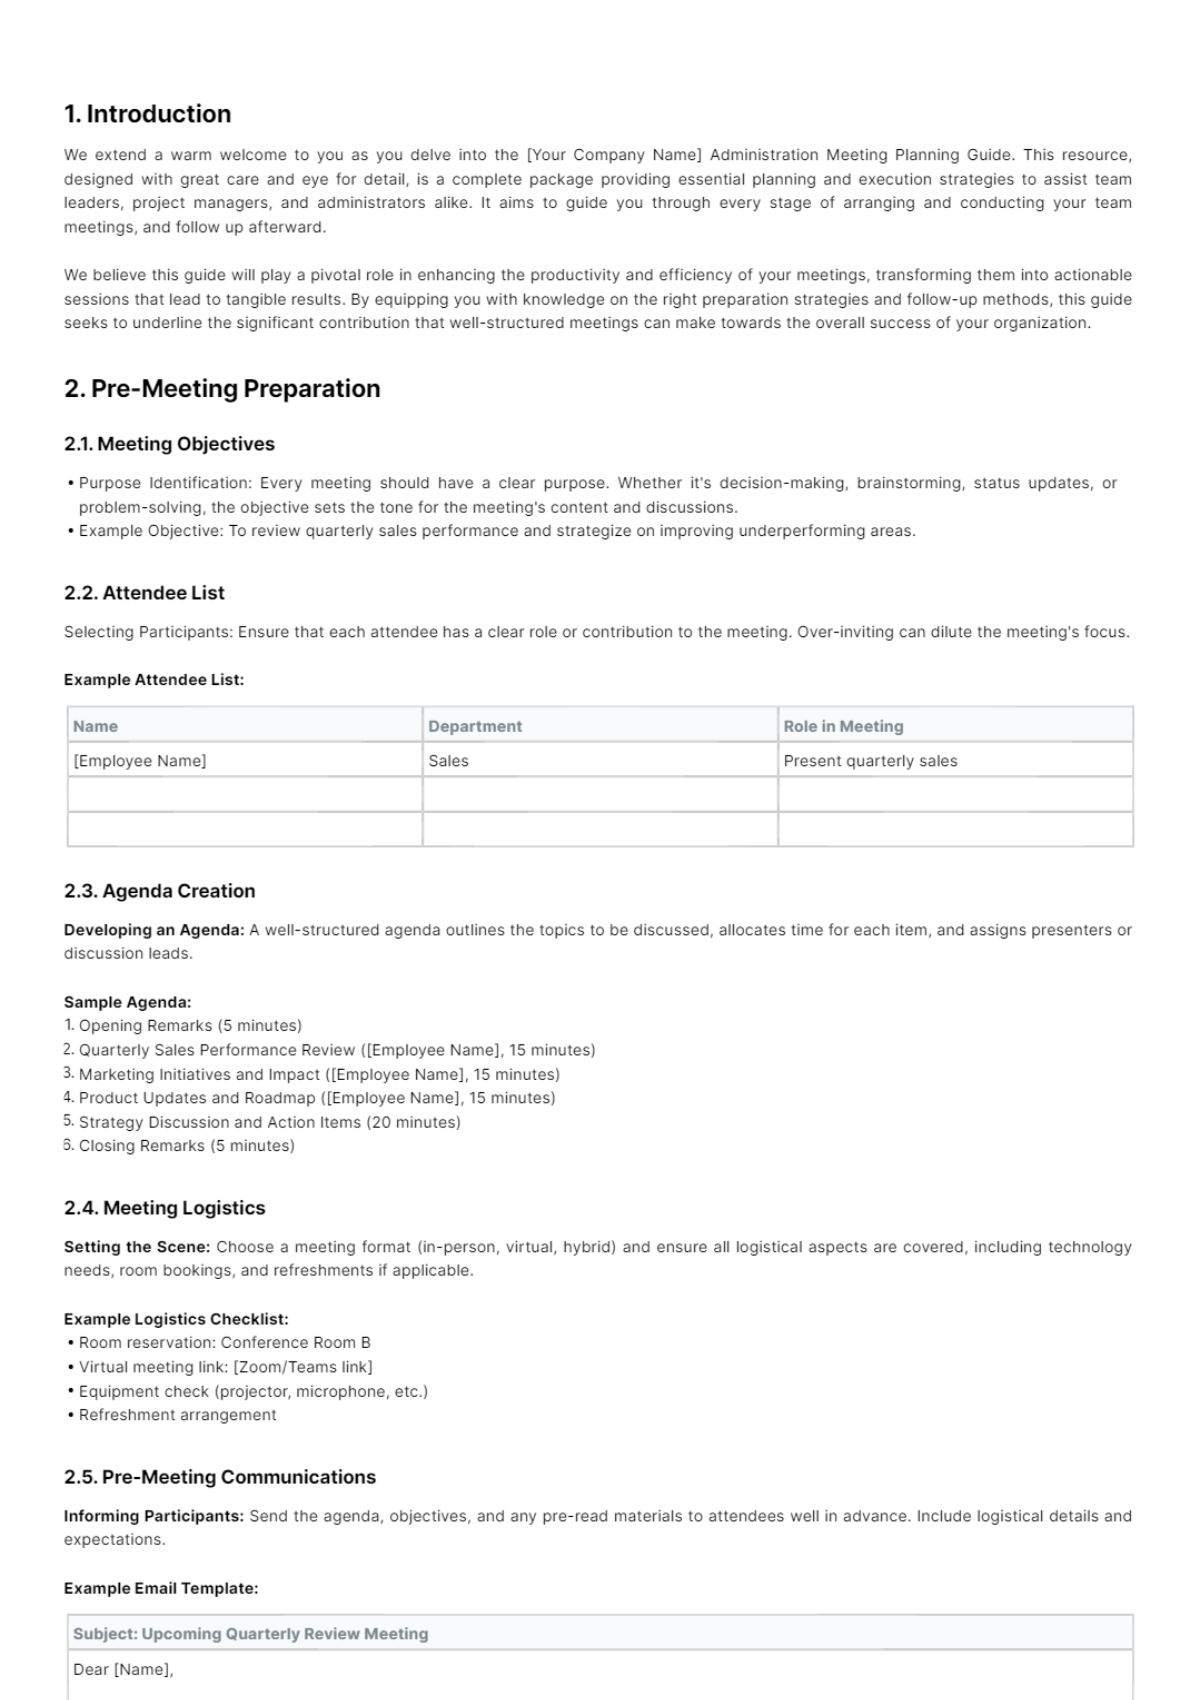 Free Administration Meeting Planning Guide Template